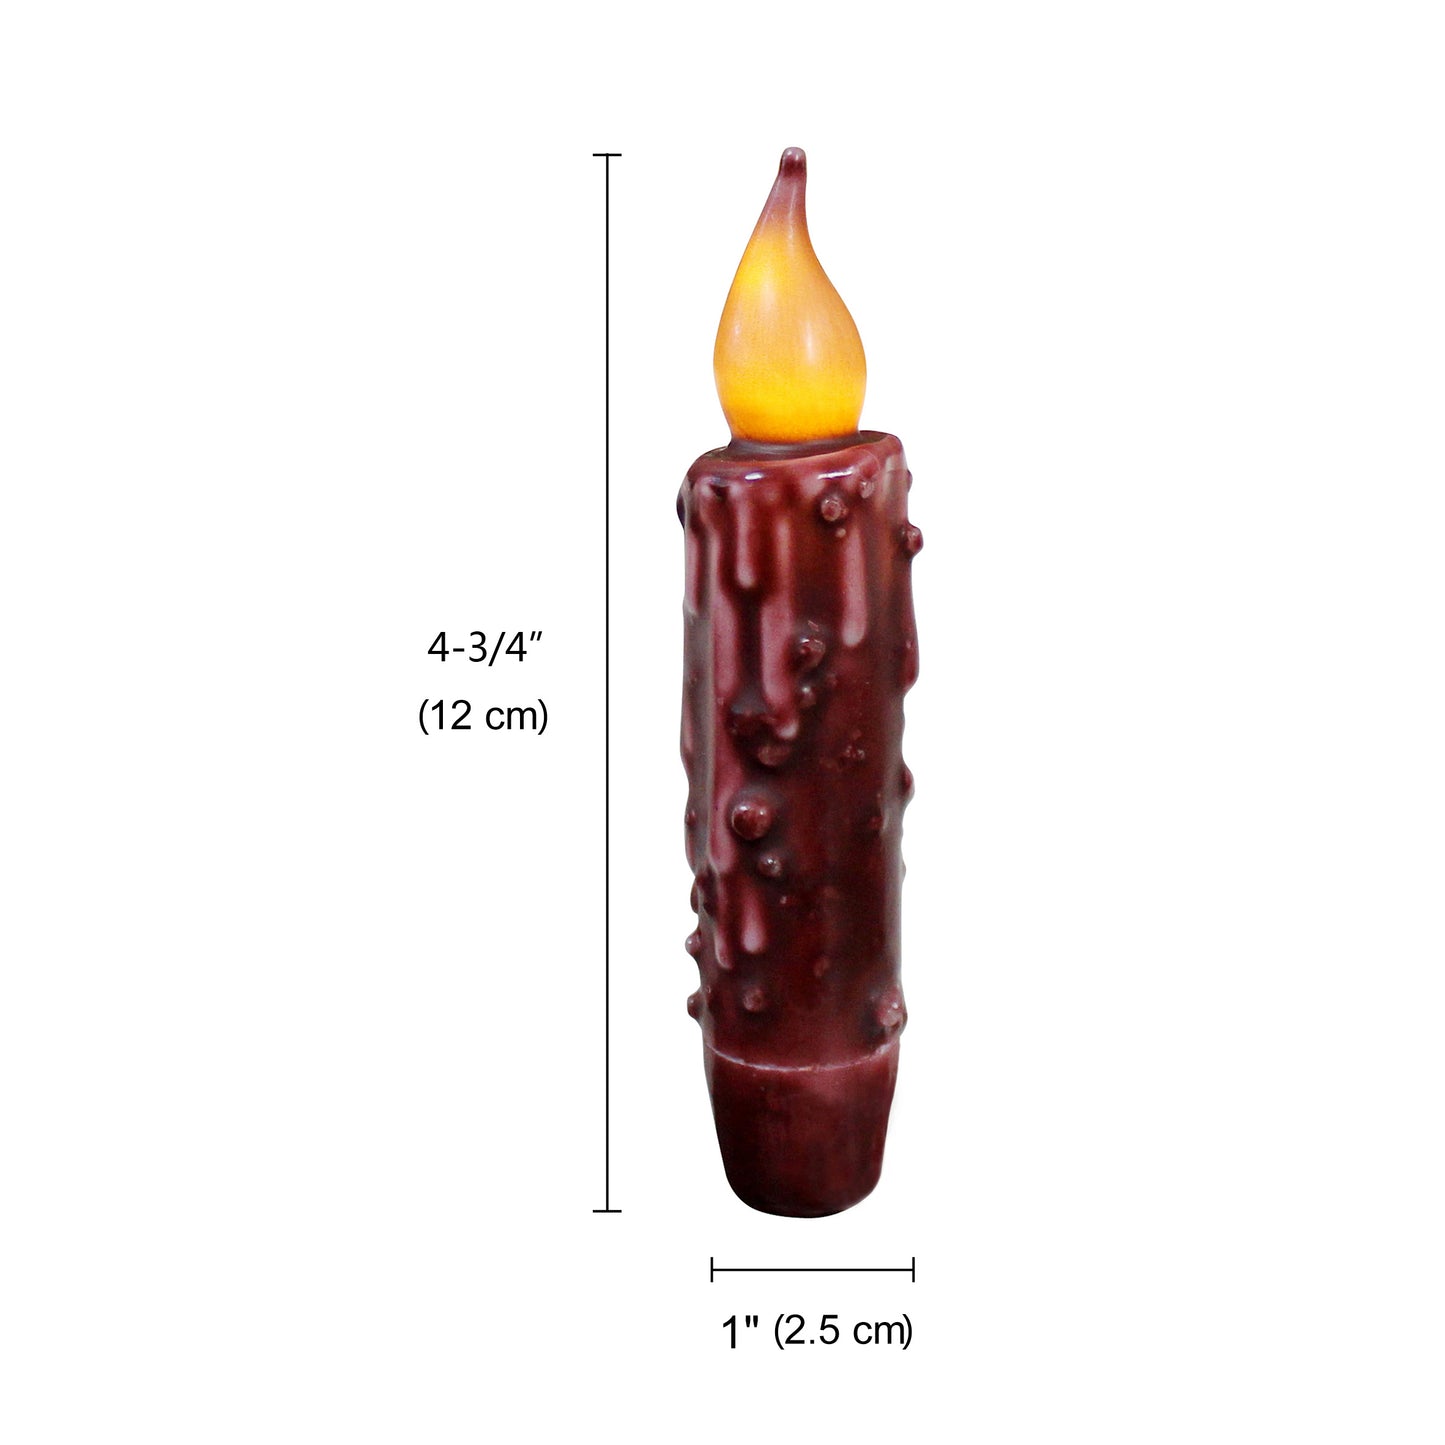 CVHOMEDECO. Real Wax Hand Dipped Battery Operated LED Timer Taper Candles Country Primitive Flameless Lights Décor, 4.75 Inch, Burgundy, 2 PCS in a Package